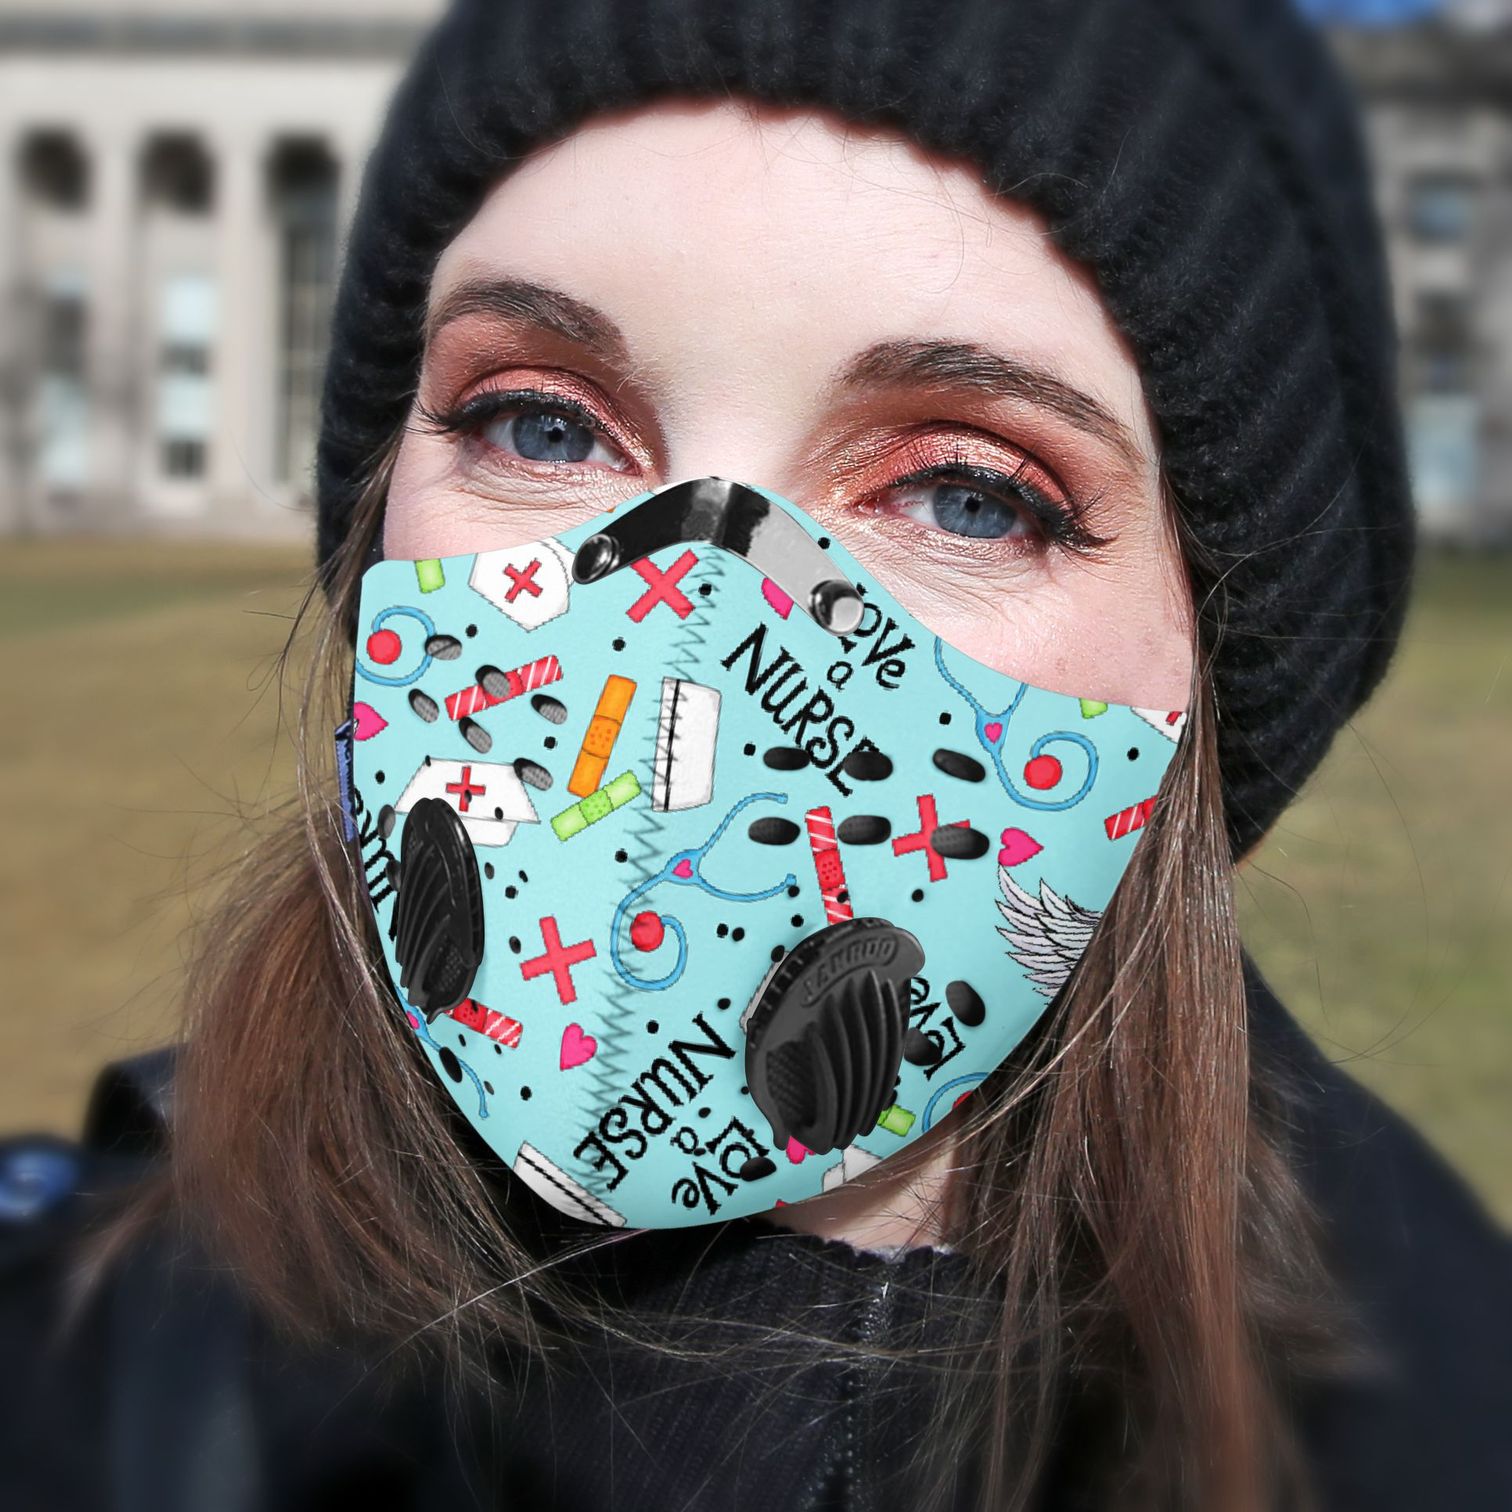 CAMBRIDGE, MA - 2/12/2020: Molly Kruko has a compromised immune system wears a protective mask just about all the time works at MIT.  (David L Ryan/Globe Staff ) SECTION: METRO TOPIC 527